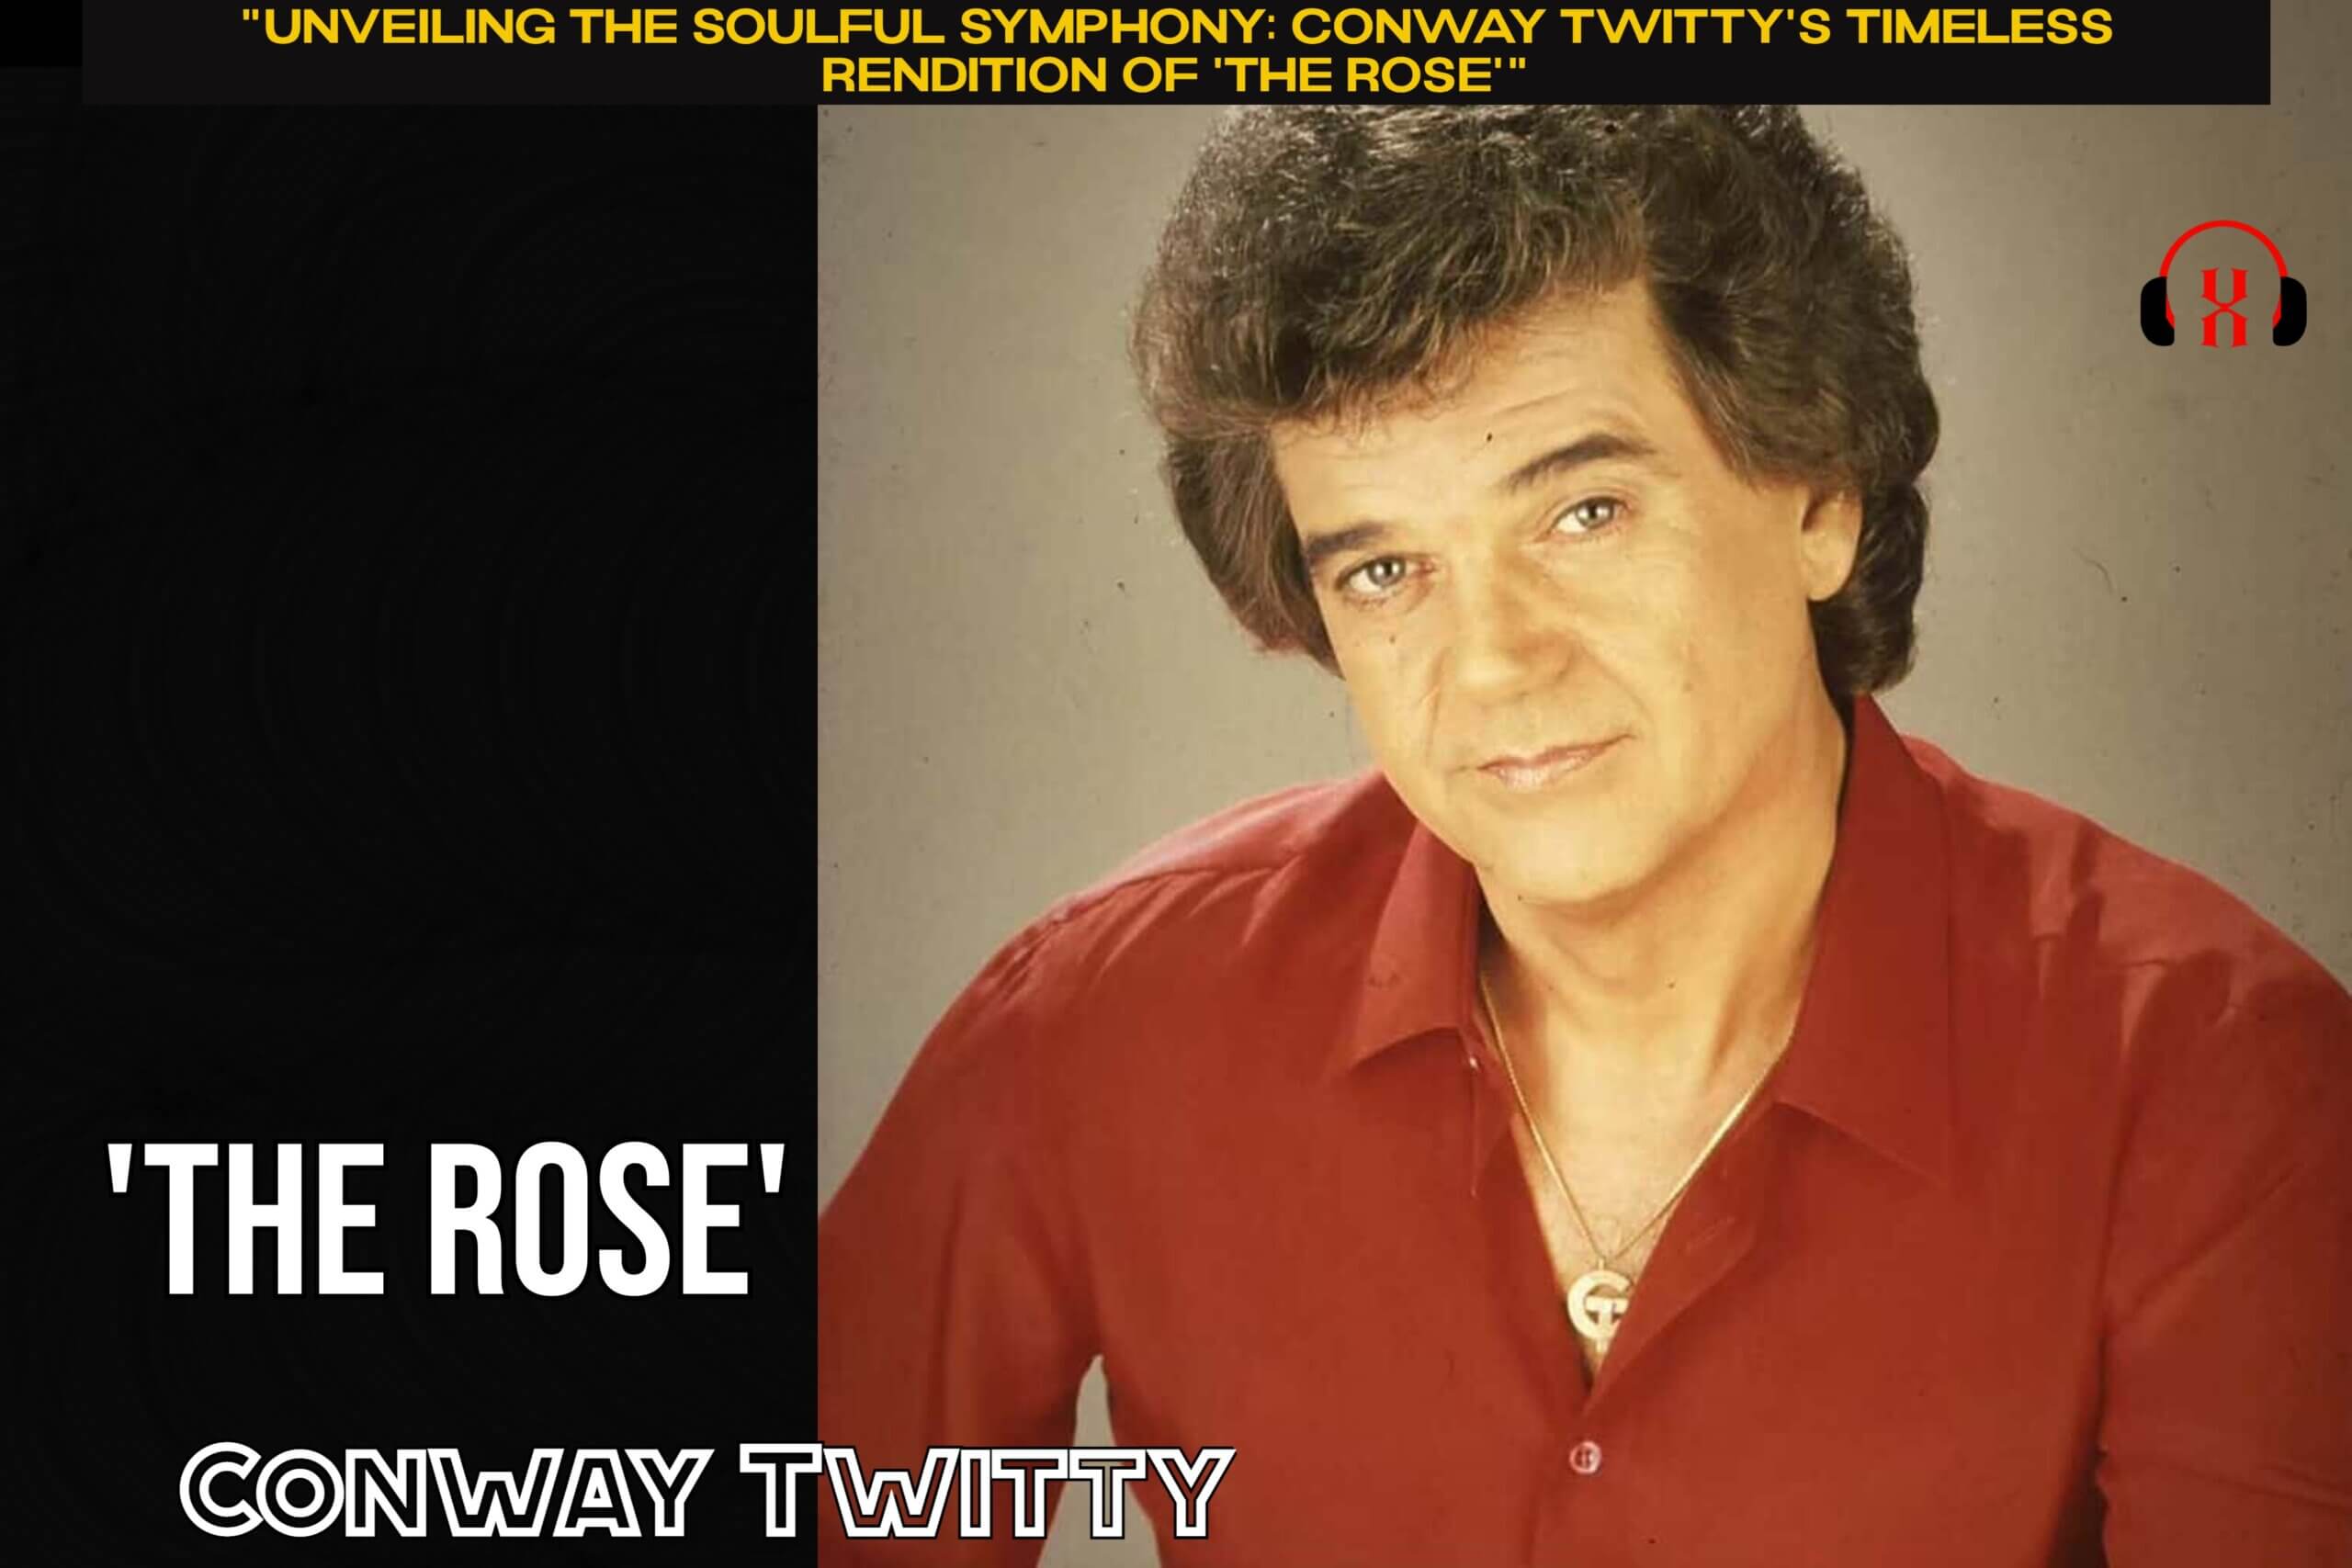 “Unveiling the Soulful Symphony: Conway Twitty’s Timeless Rendition of ‘The Rose'”